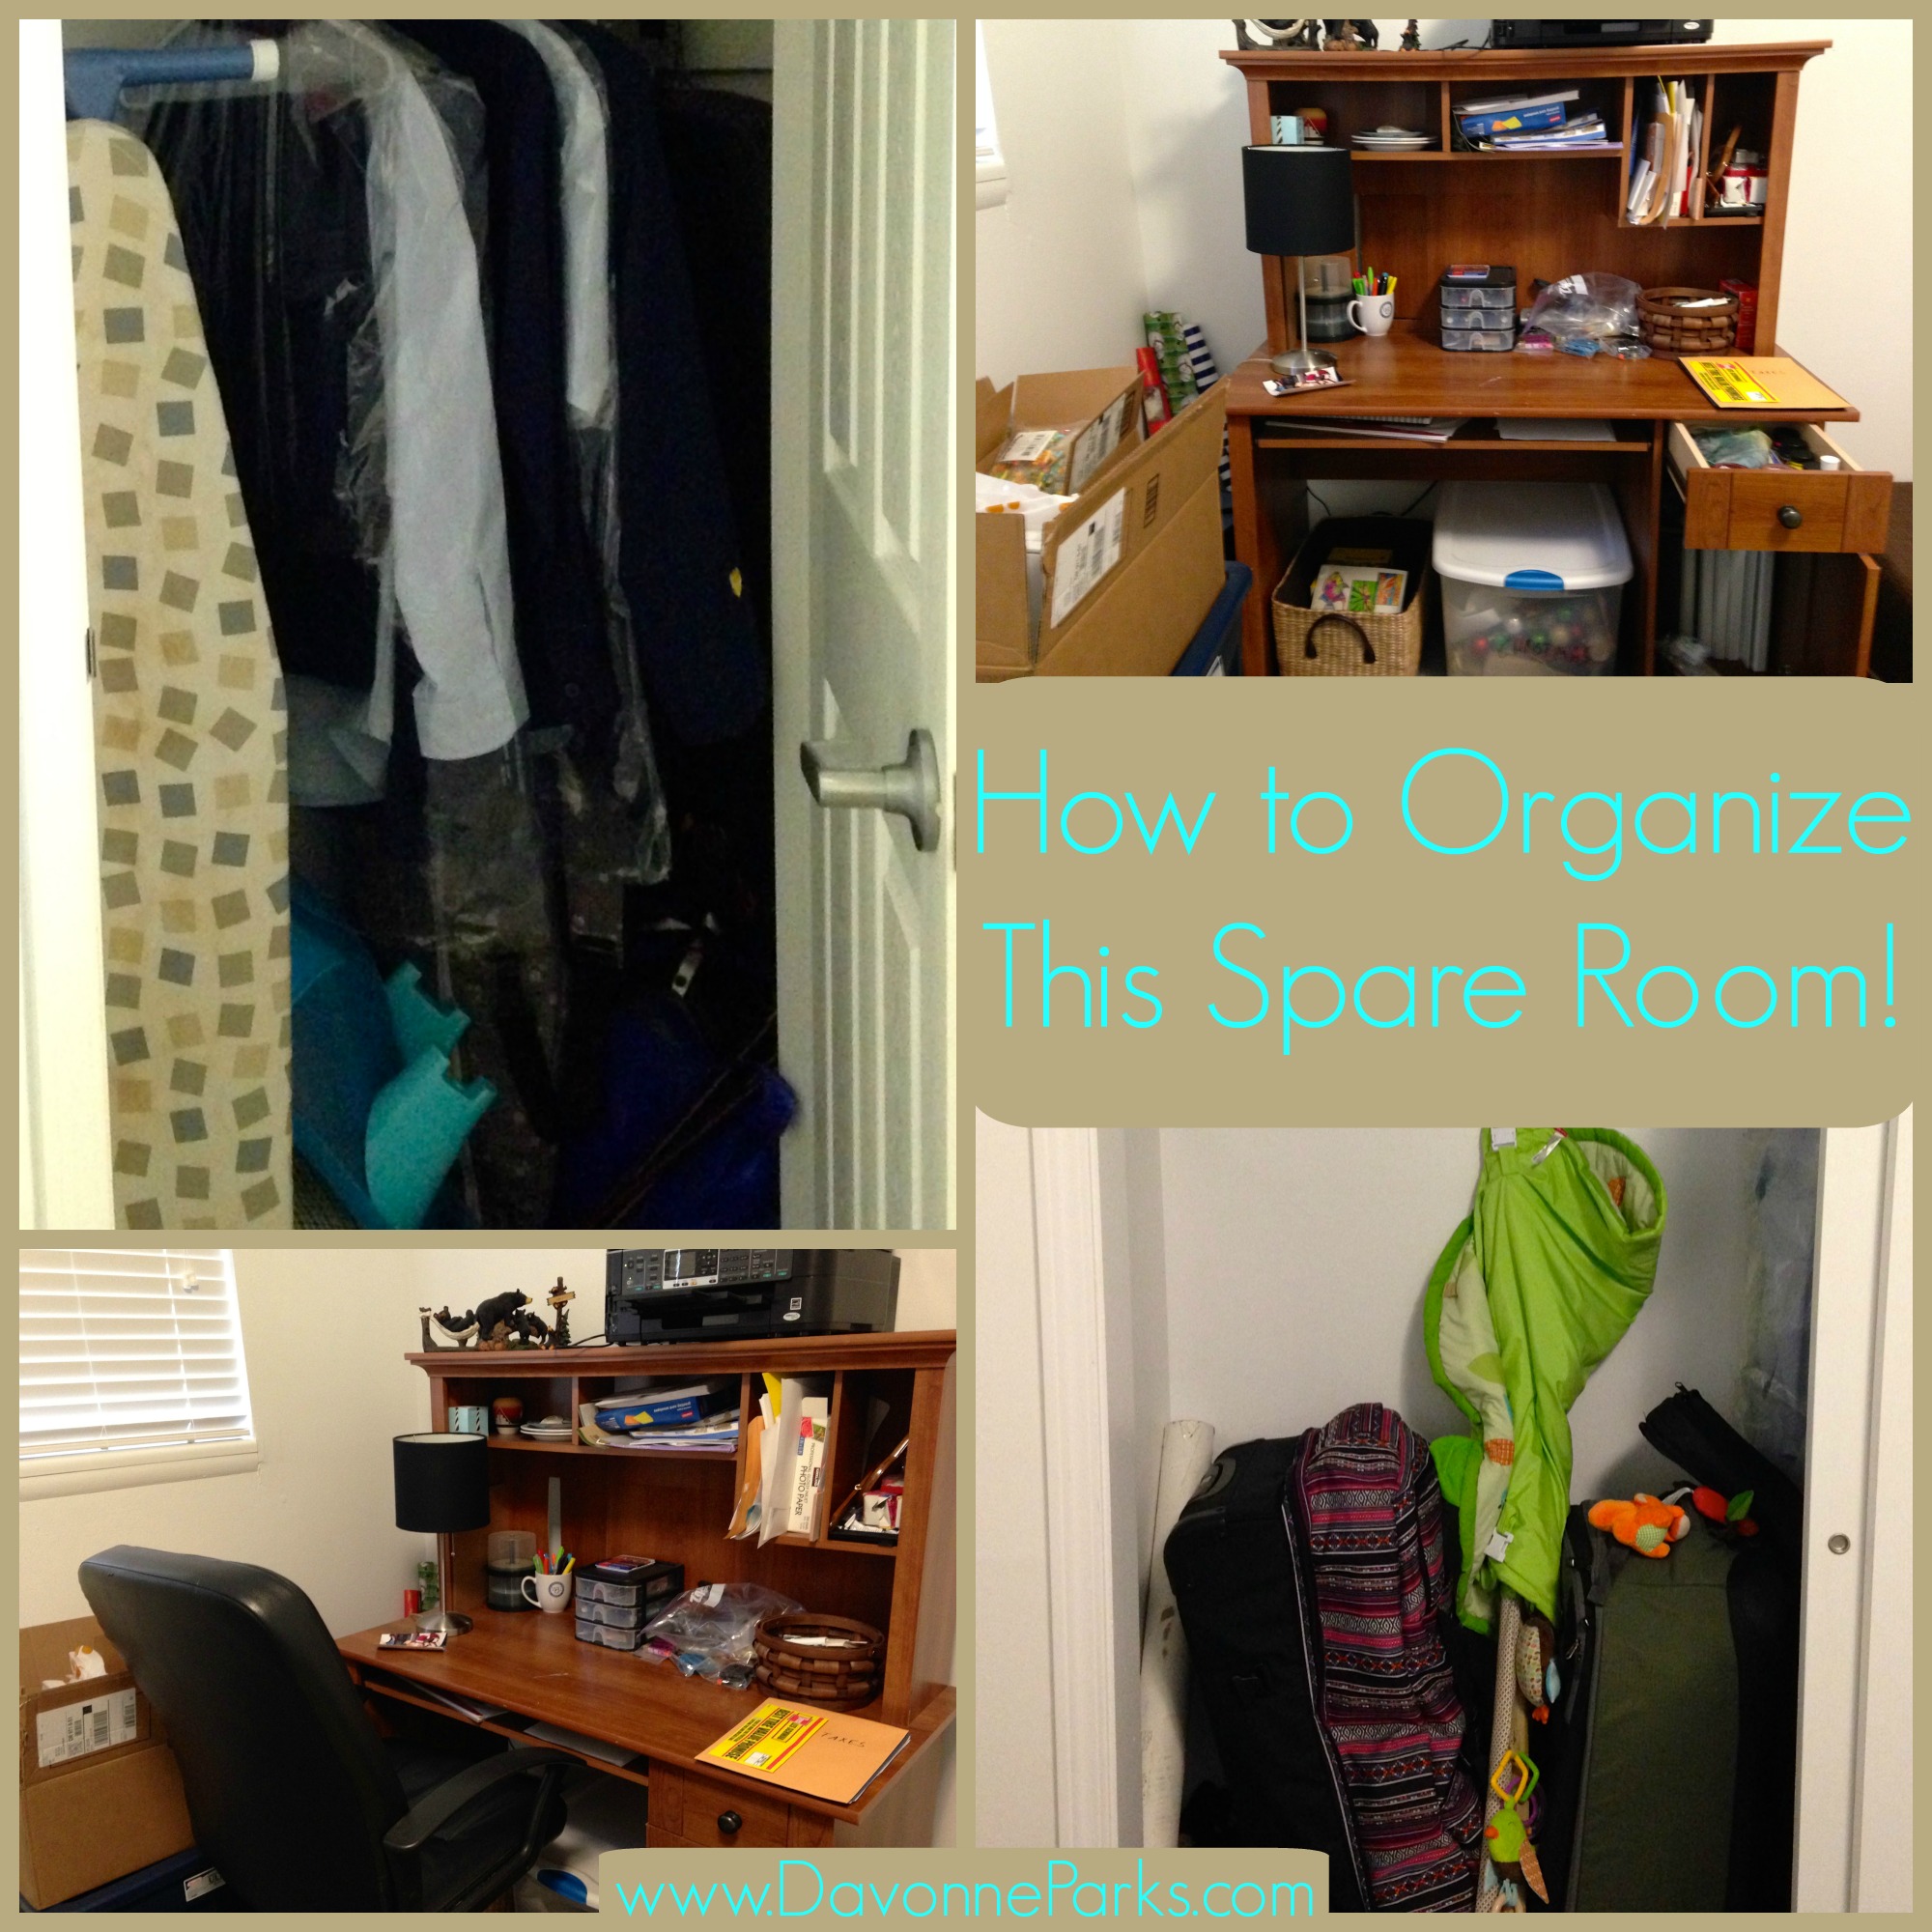 3 Simple Tips for Organizing Your Spare Room